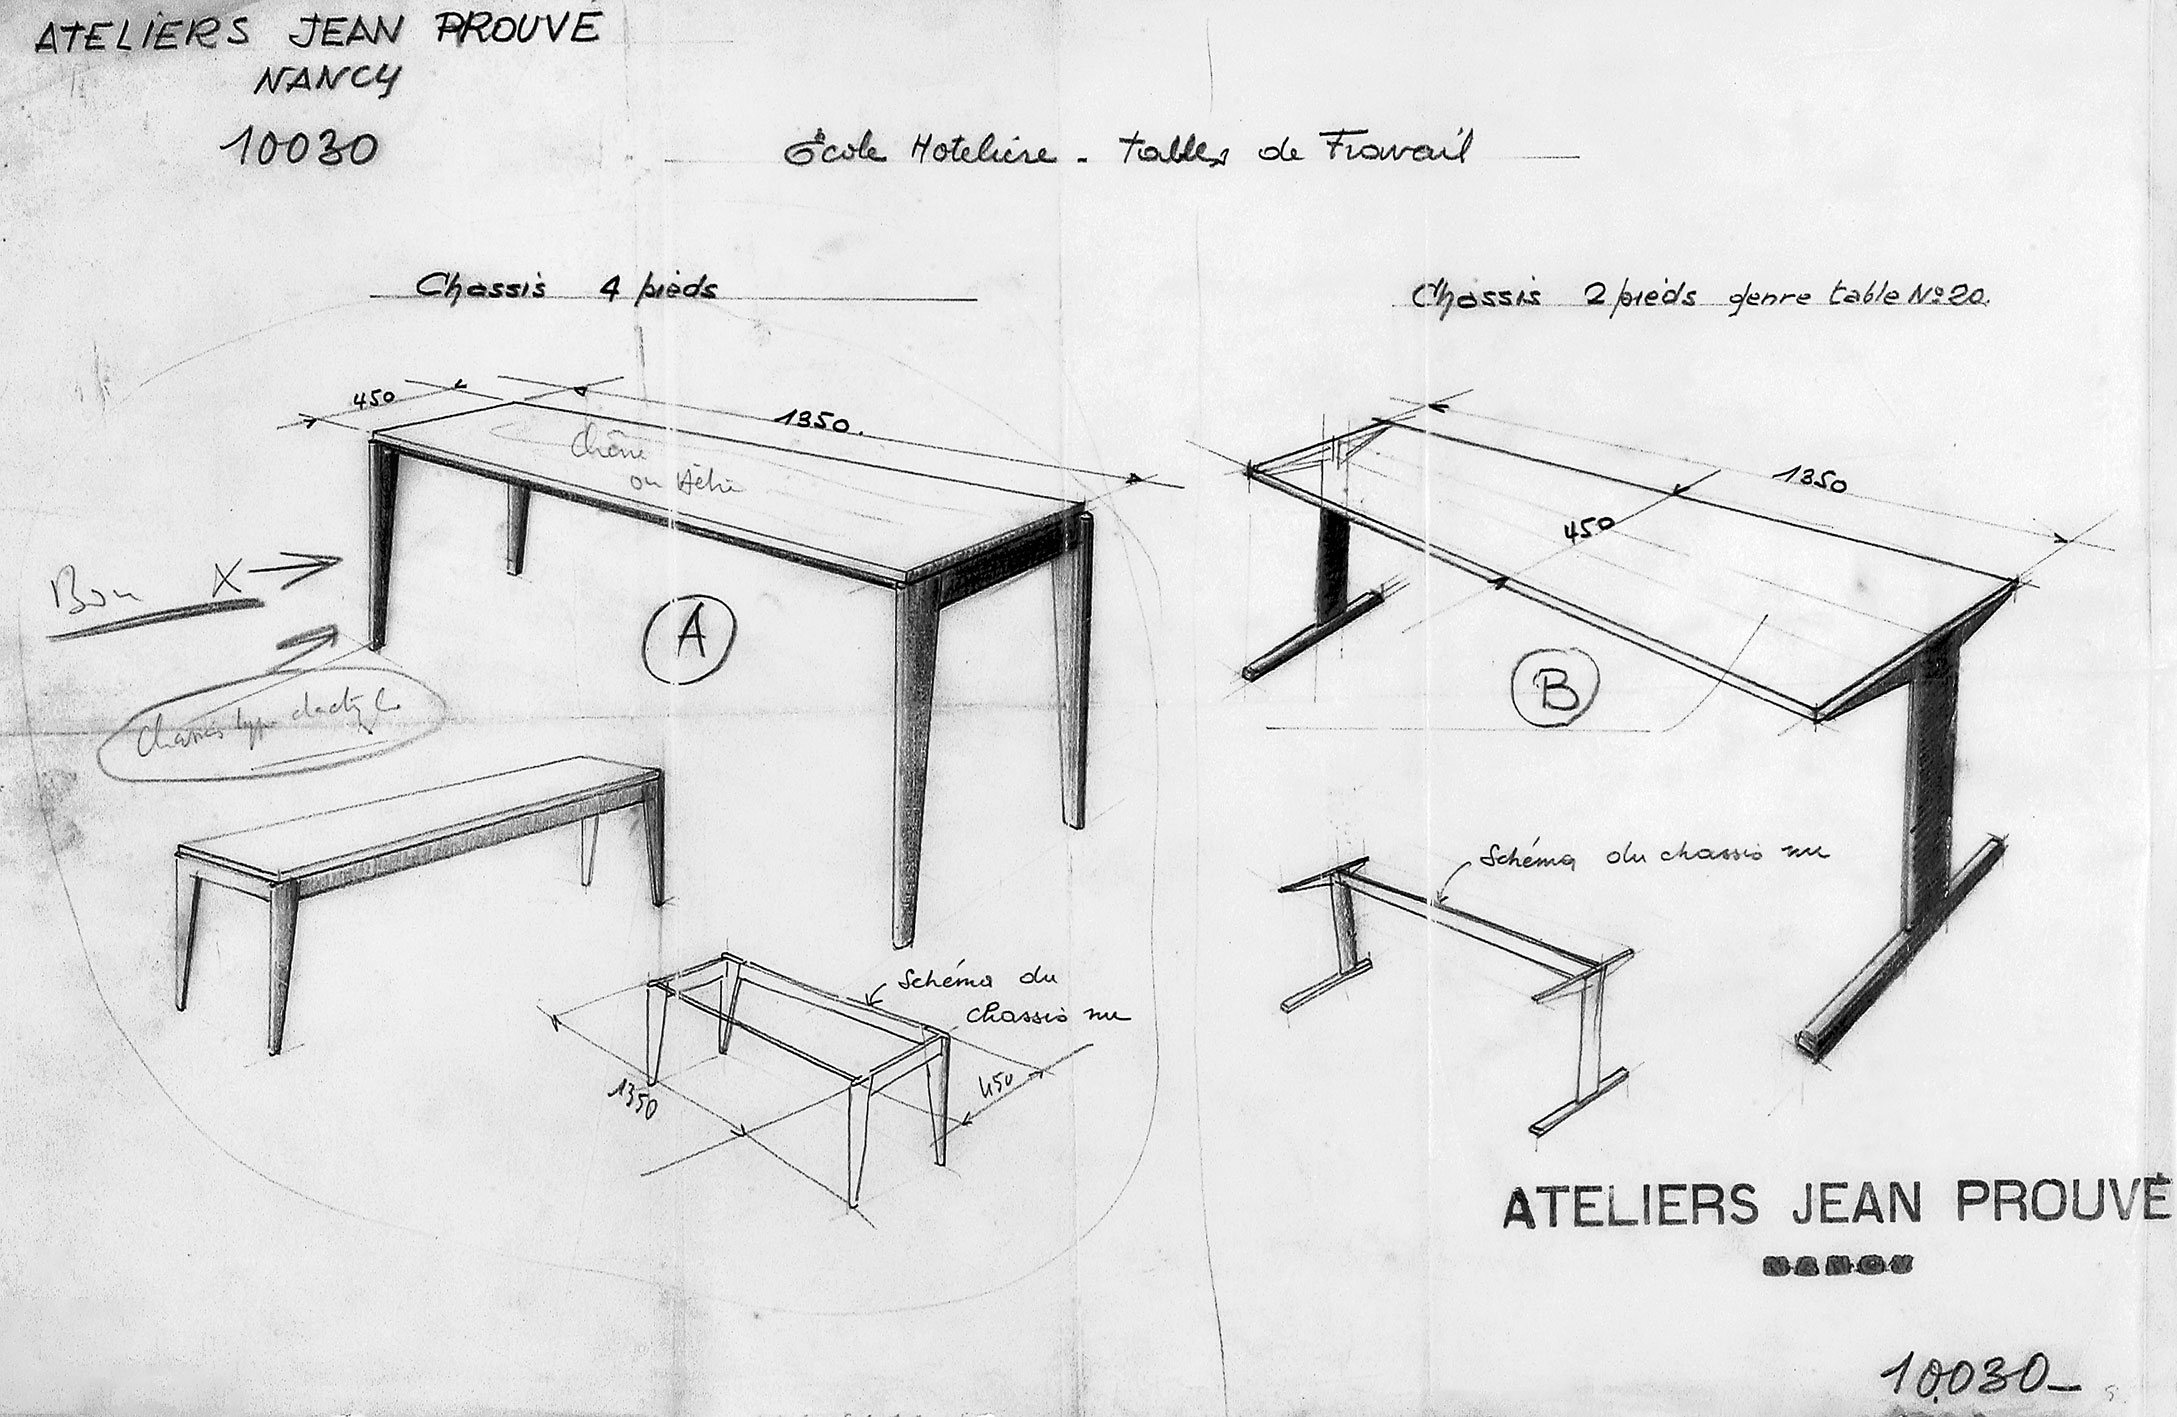 “Hotelery School, work tables”. Structure of Dactylo and Cité model tables. Ateliers Jean Prouvé drawing no. 10 030, 3 July 1946, by J.-M. Glatigny